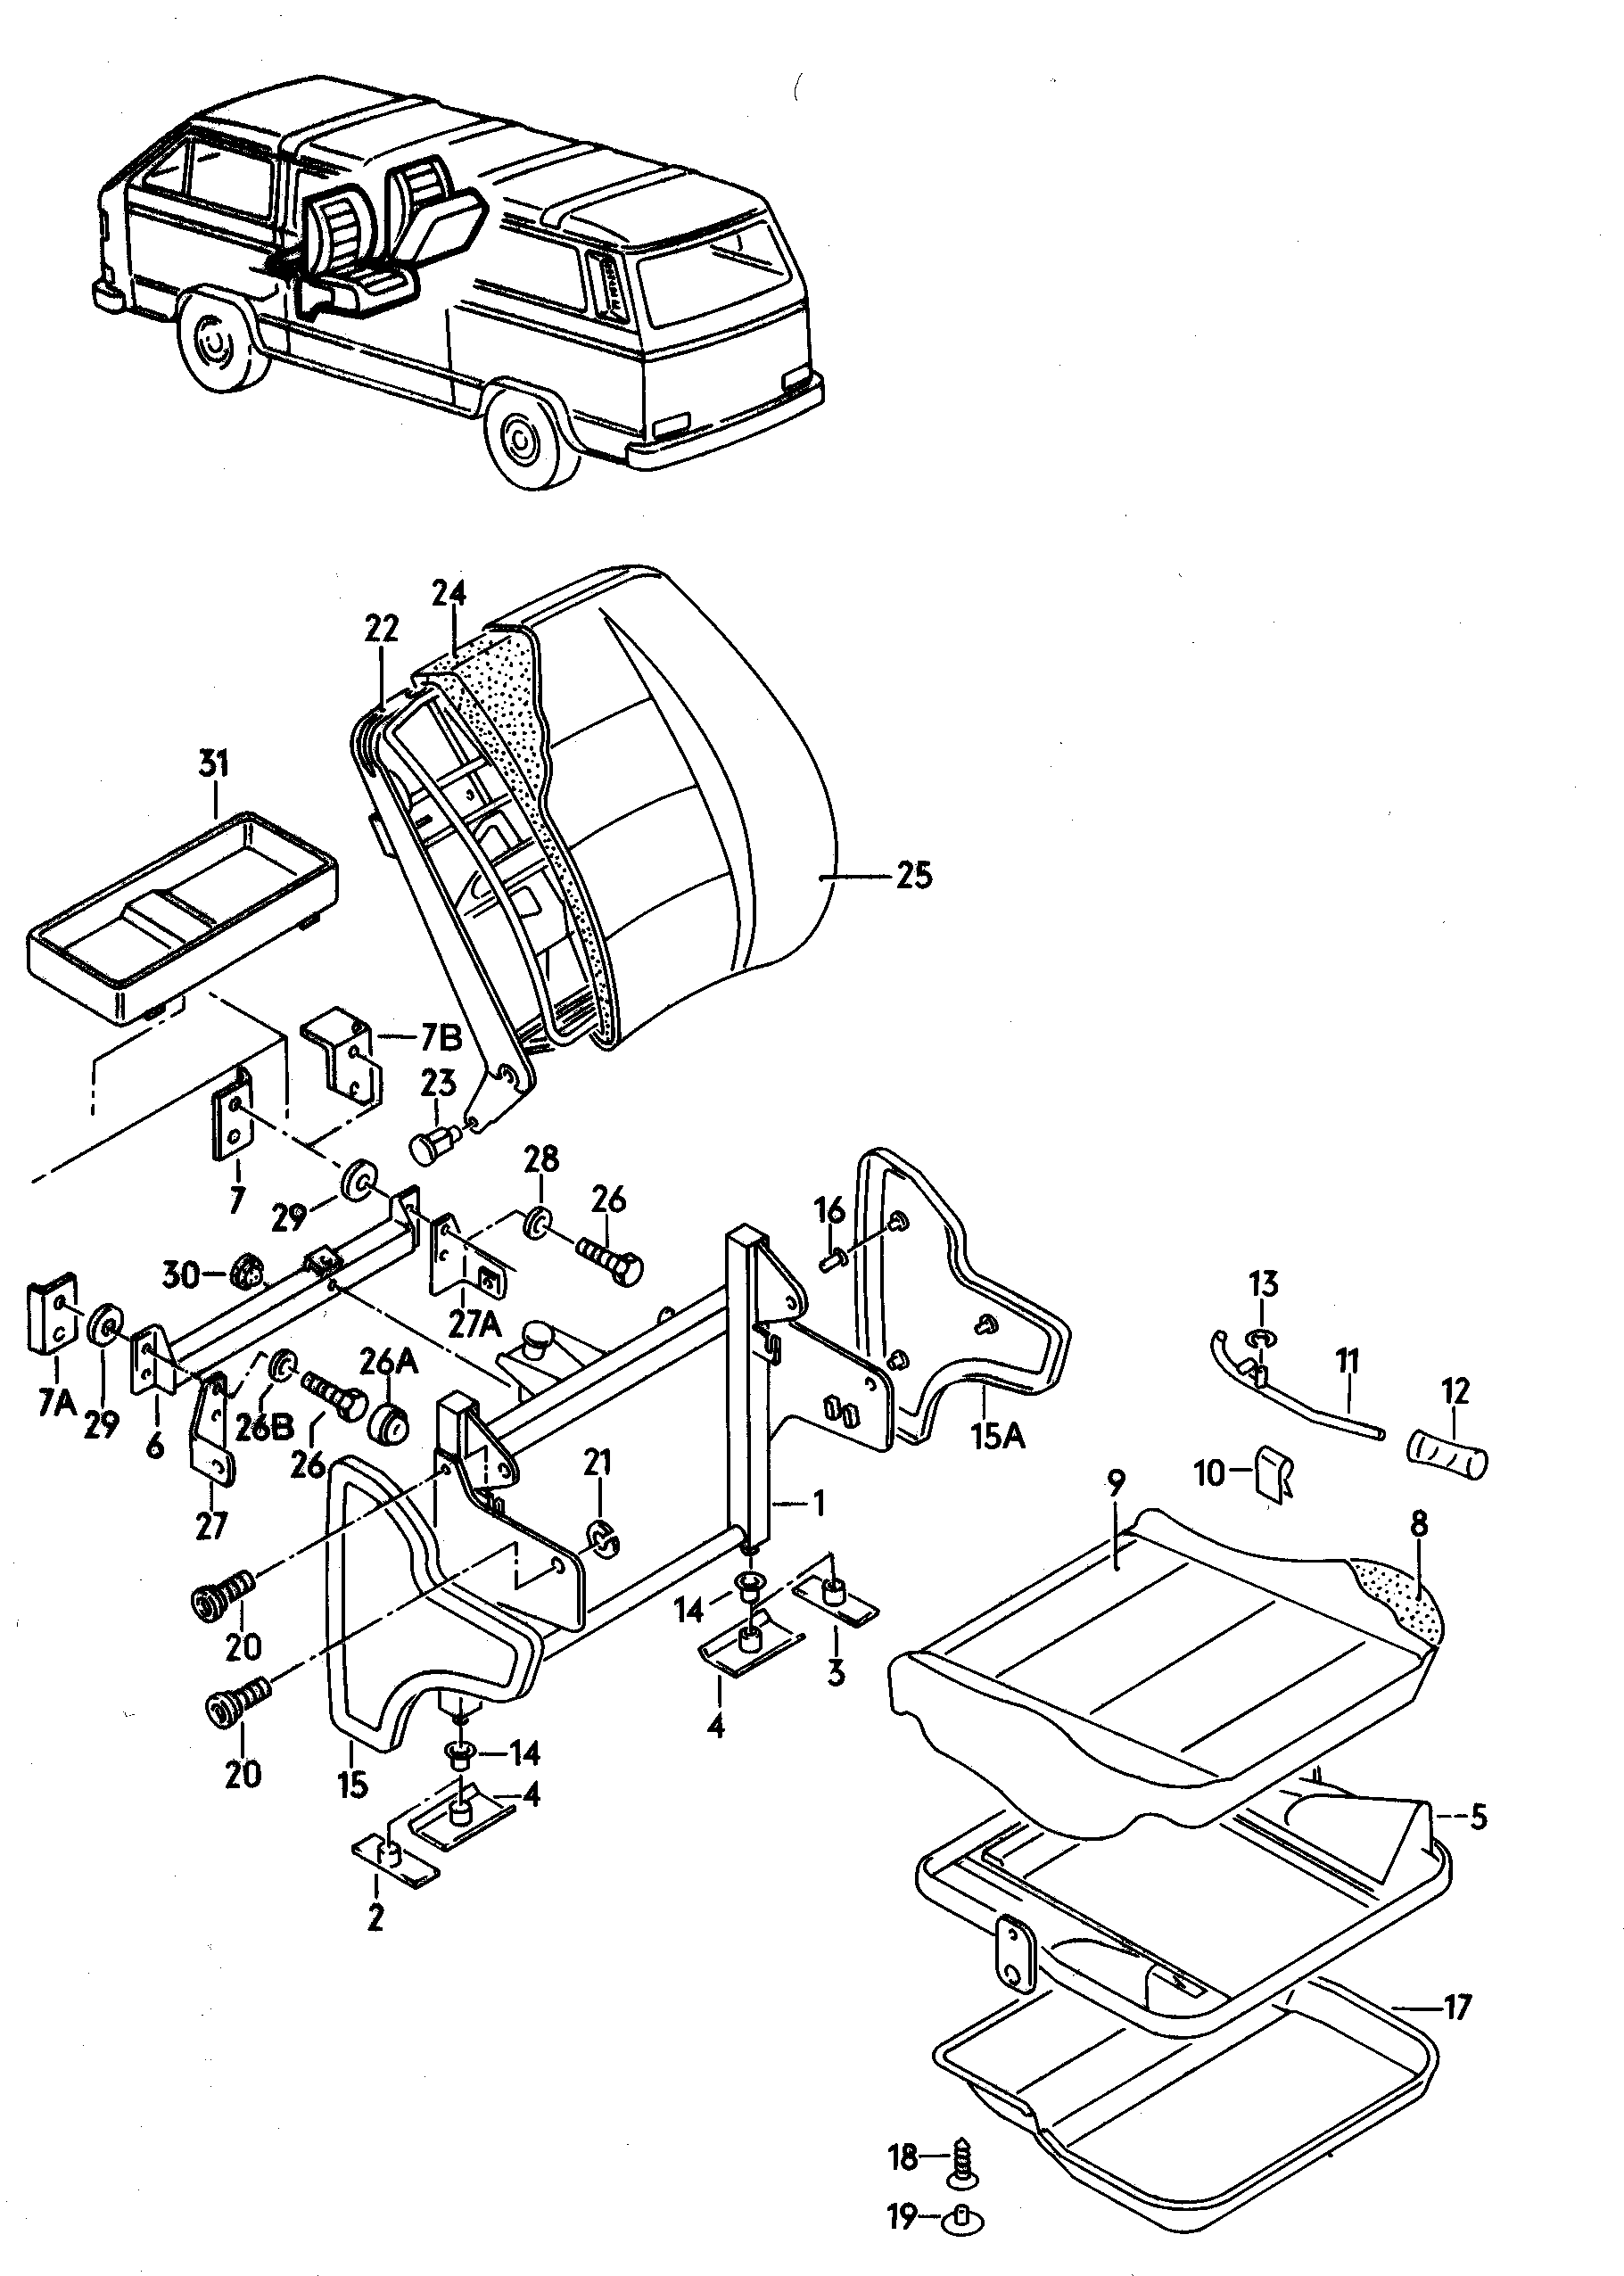 folding seat in passenger comp - Typ 2/syncro(T2)  